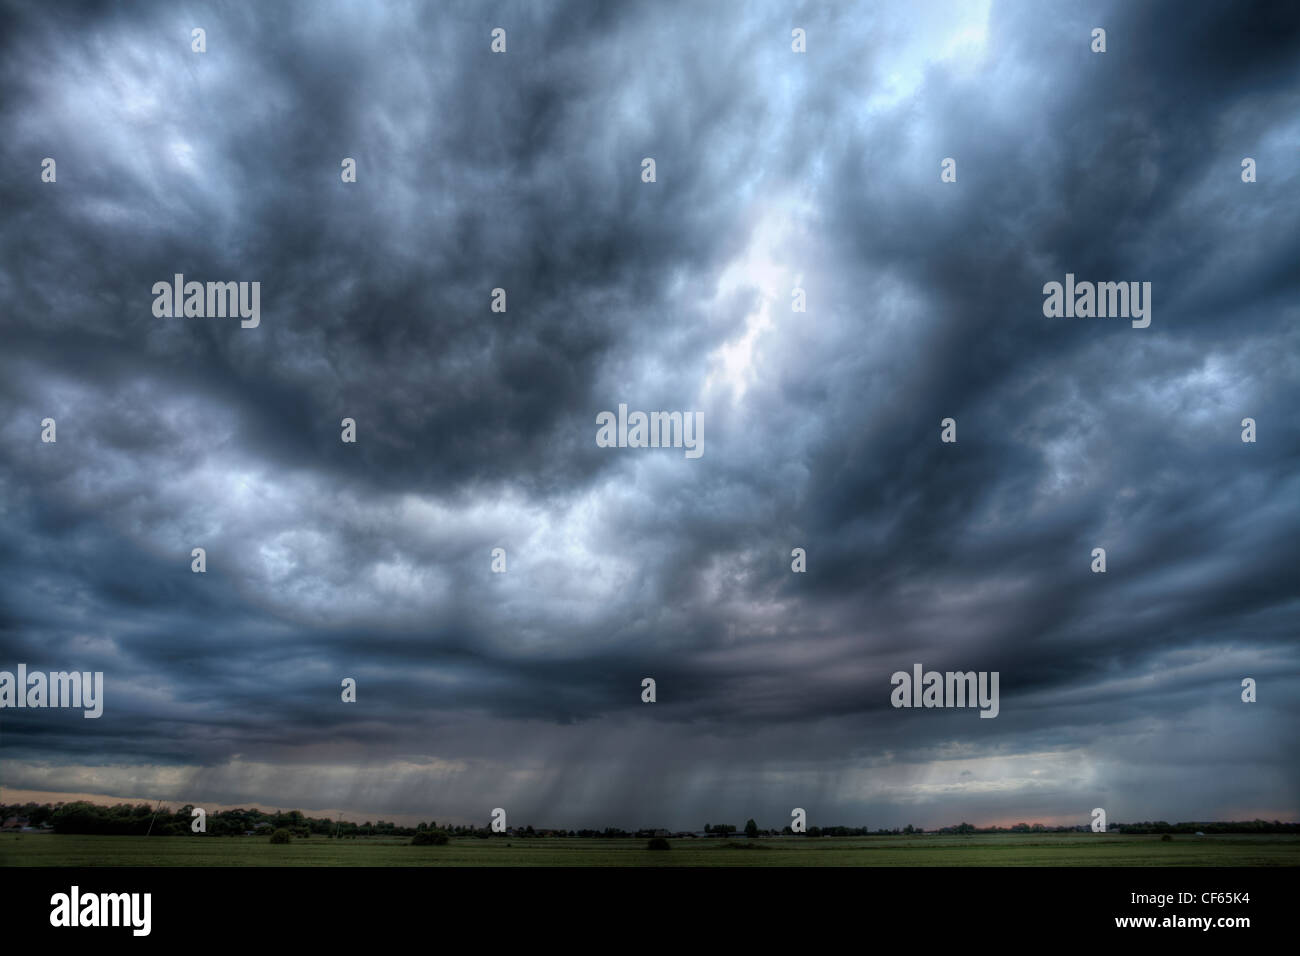 Rain falling from summer storm clouds over distant fields. Stock Photo